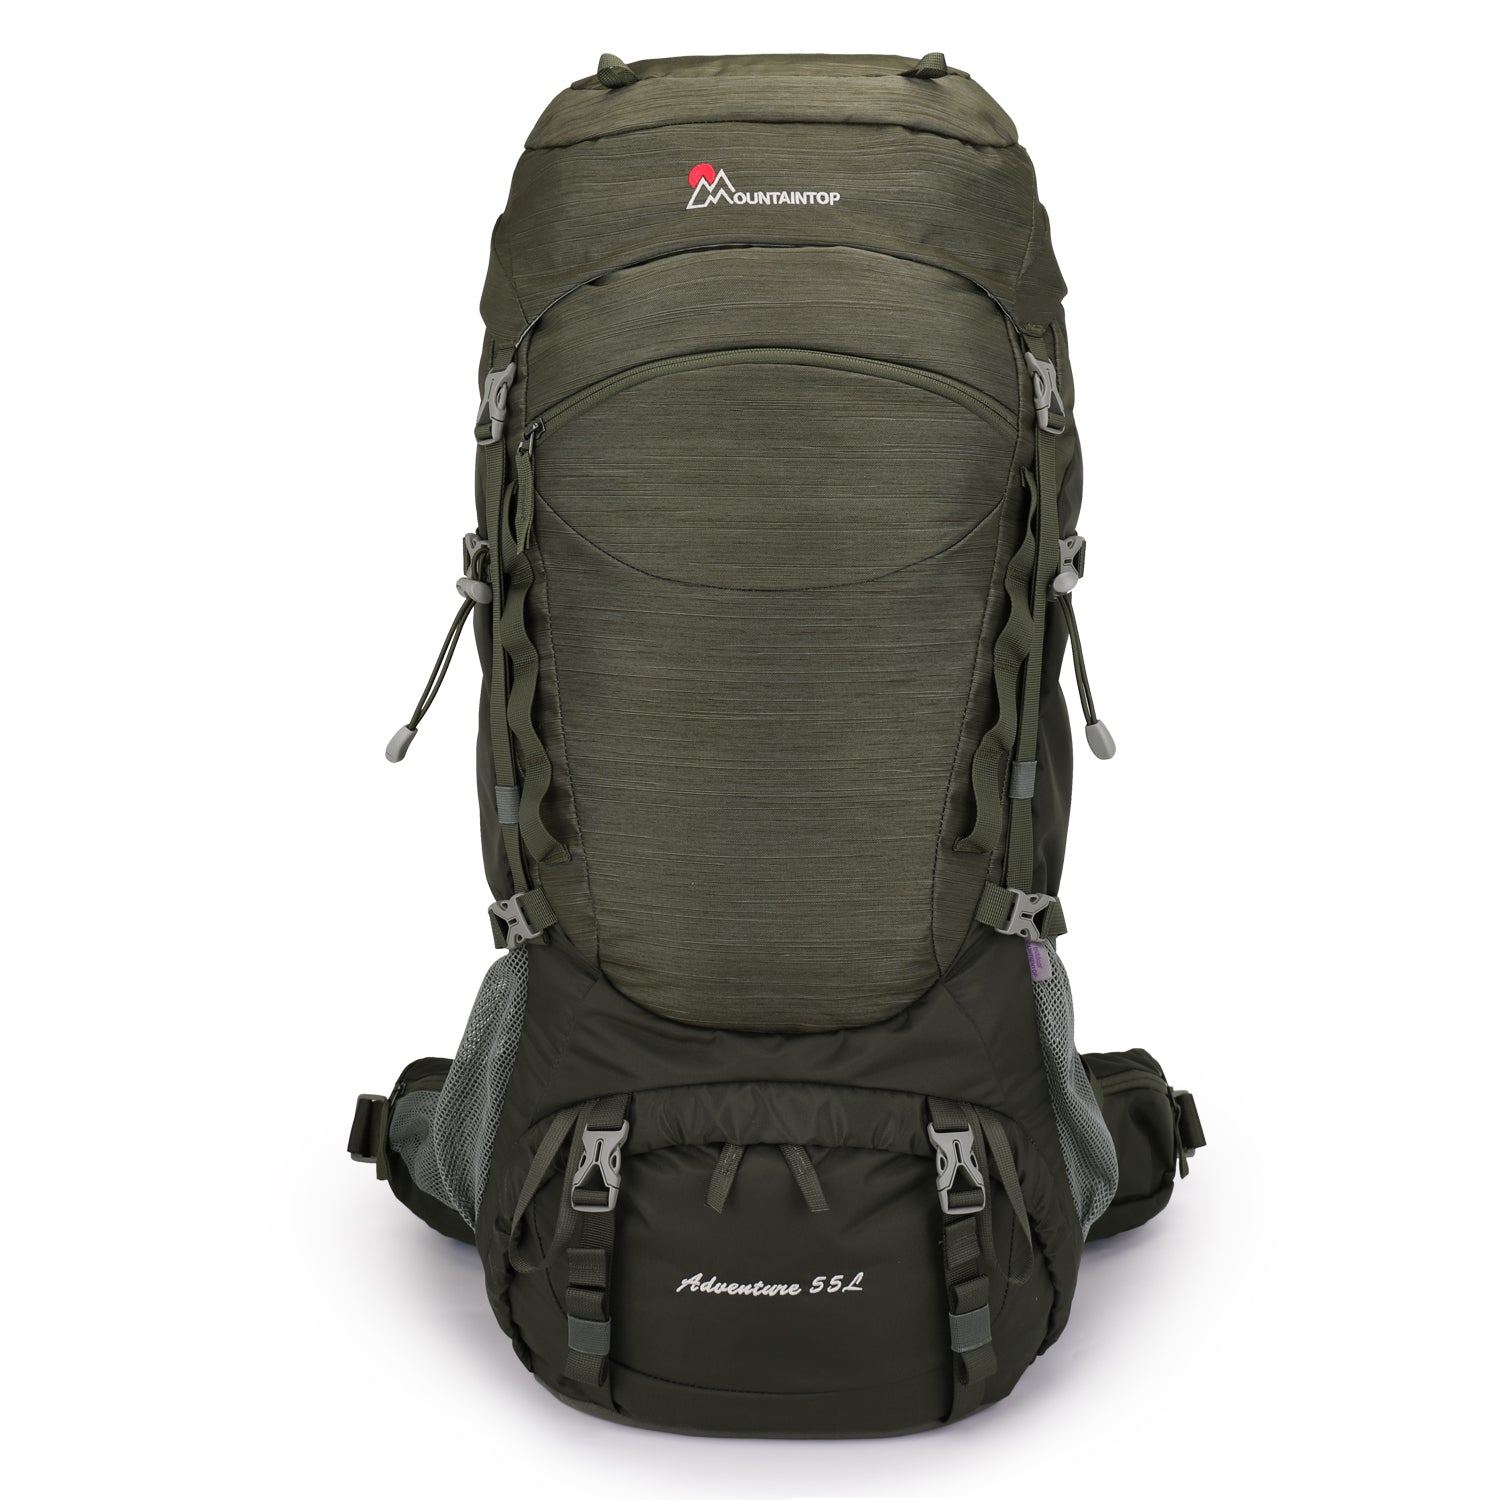 MOUNTAINTOP 55L/80L Hiking Backpack with Rain Cover 並行輸入品 バッグ